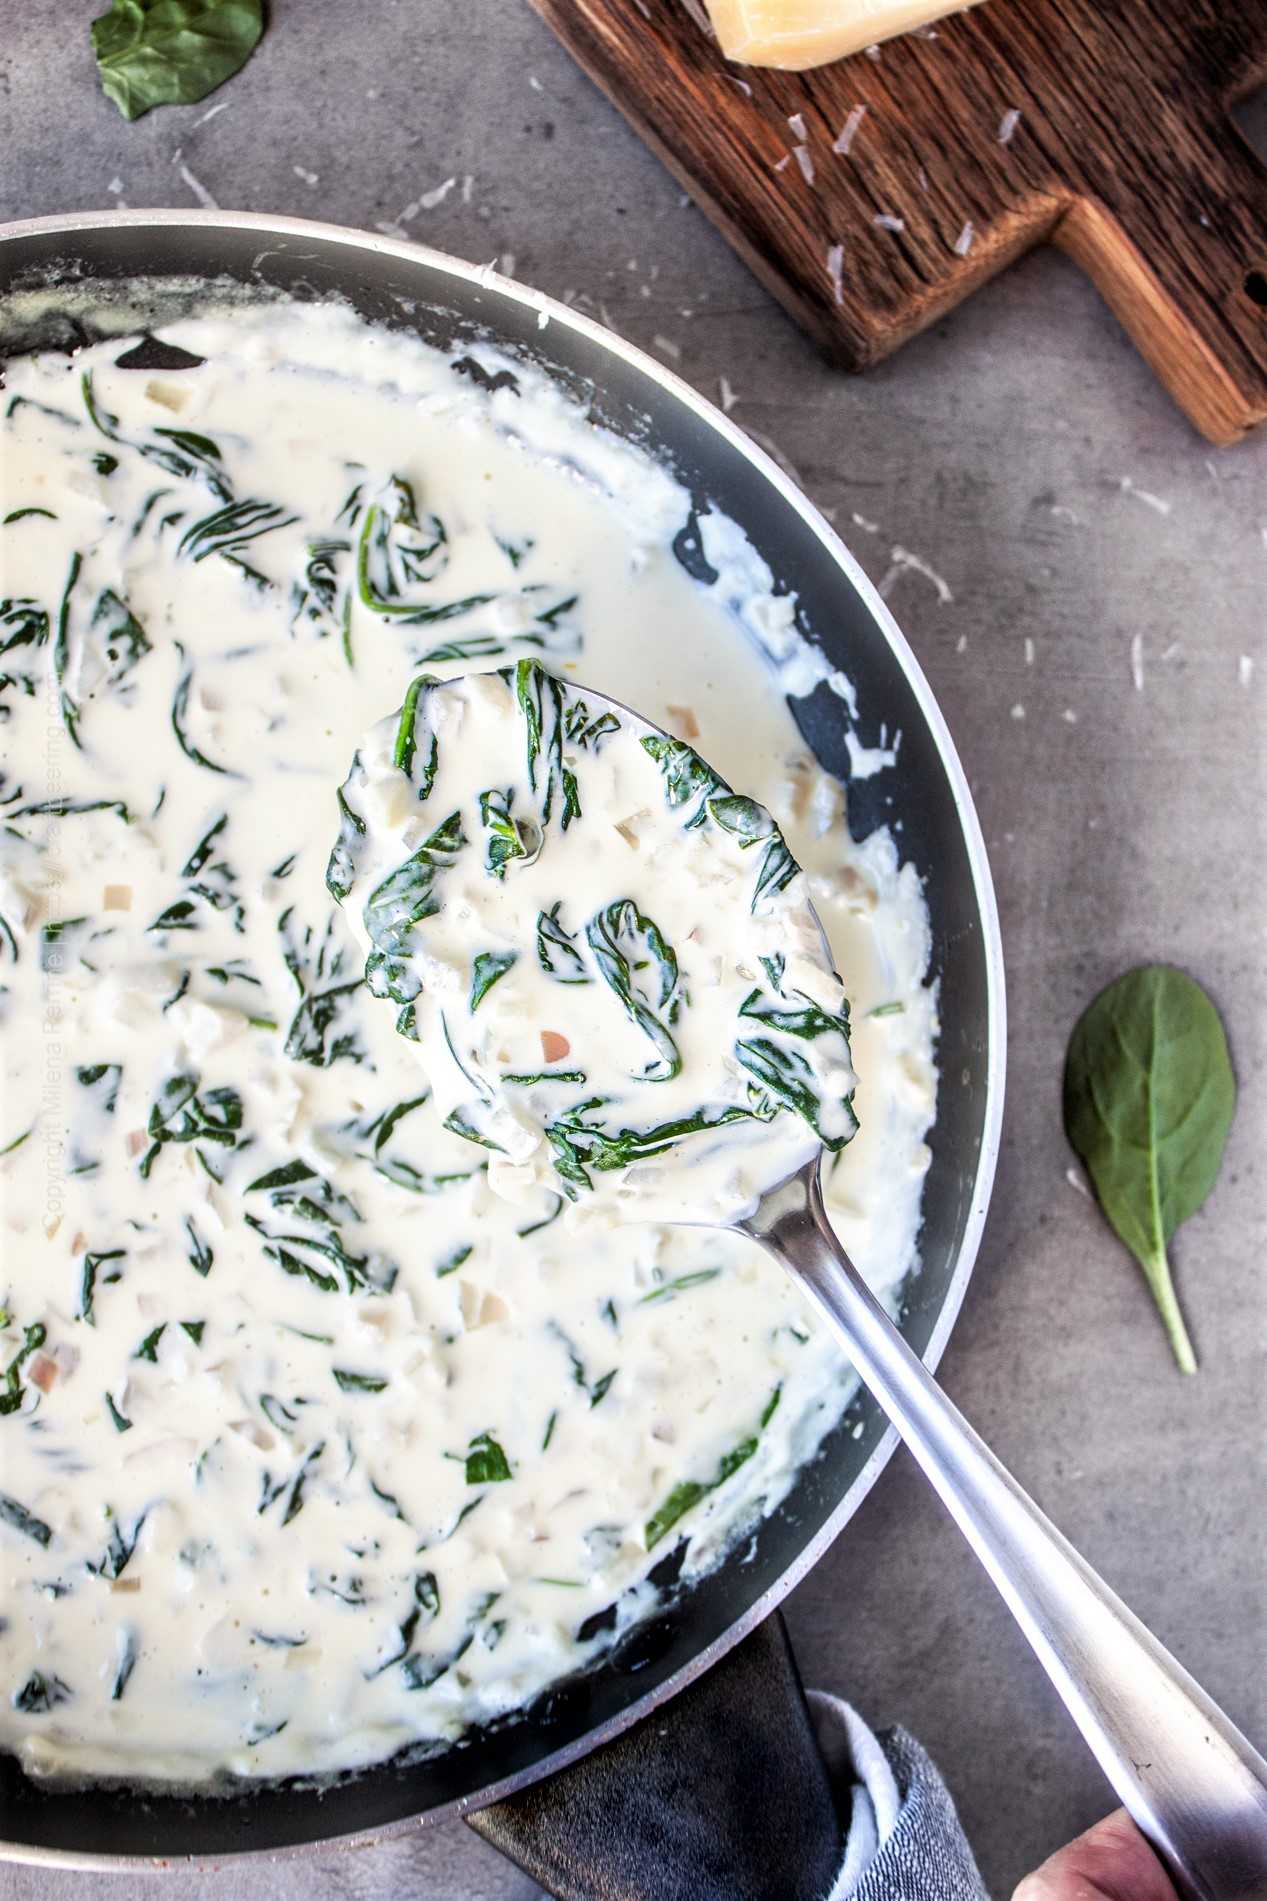 How to Make Spinach Cream Sauce